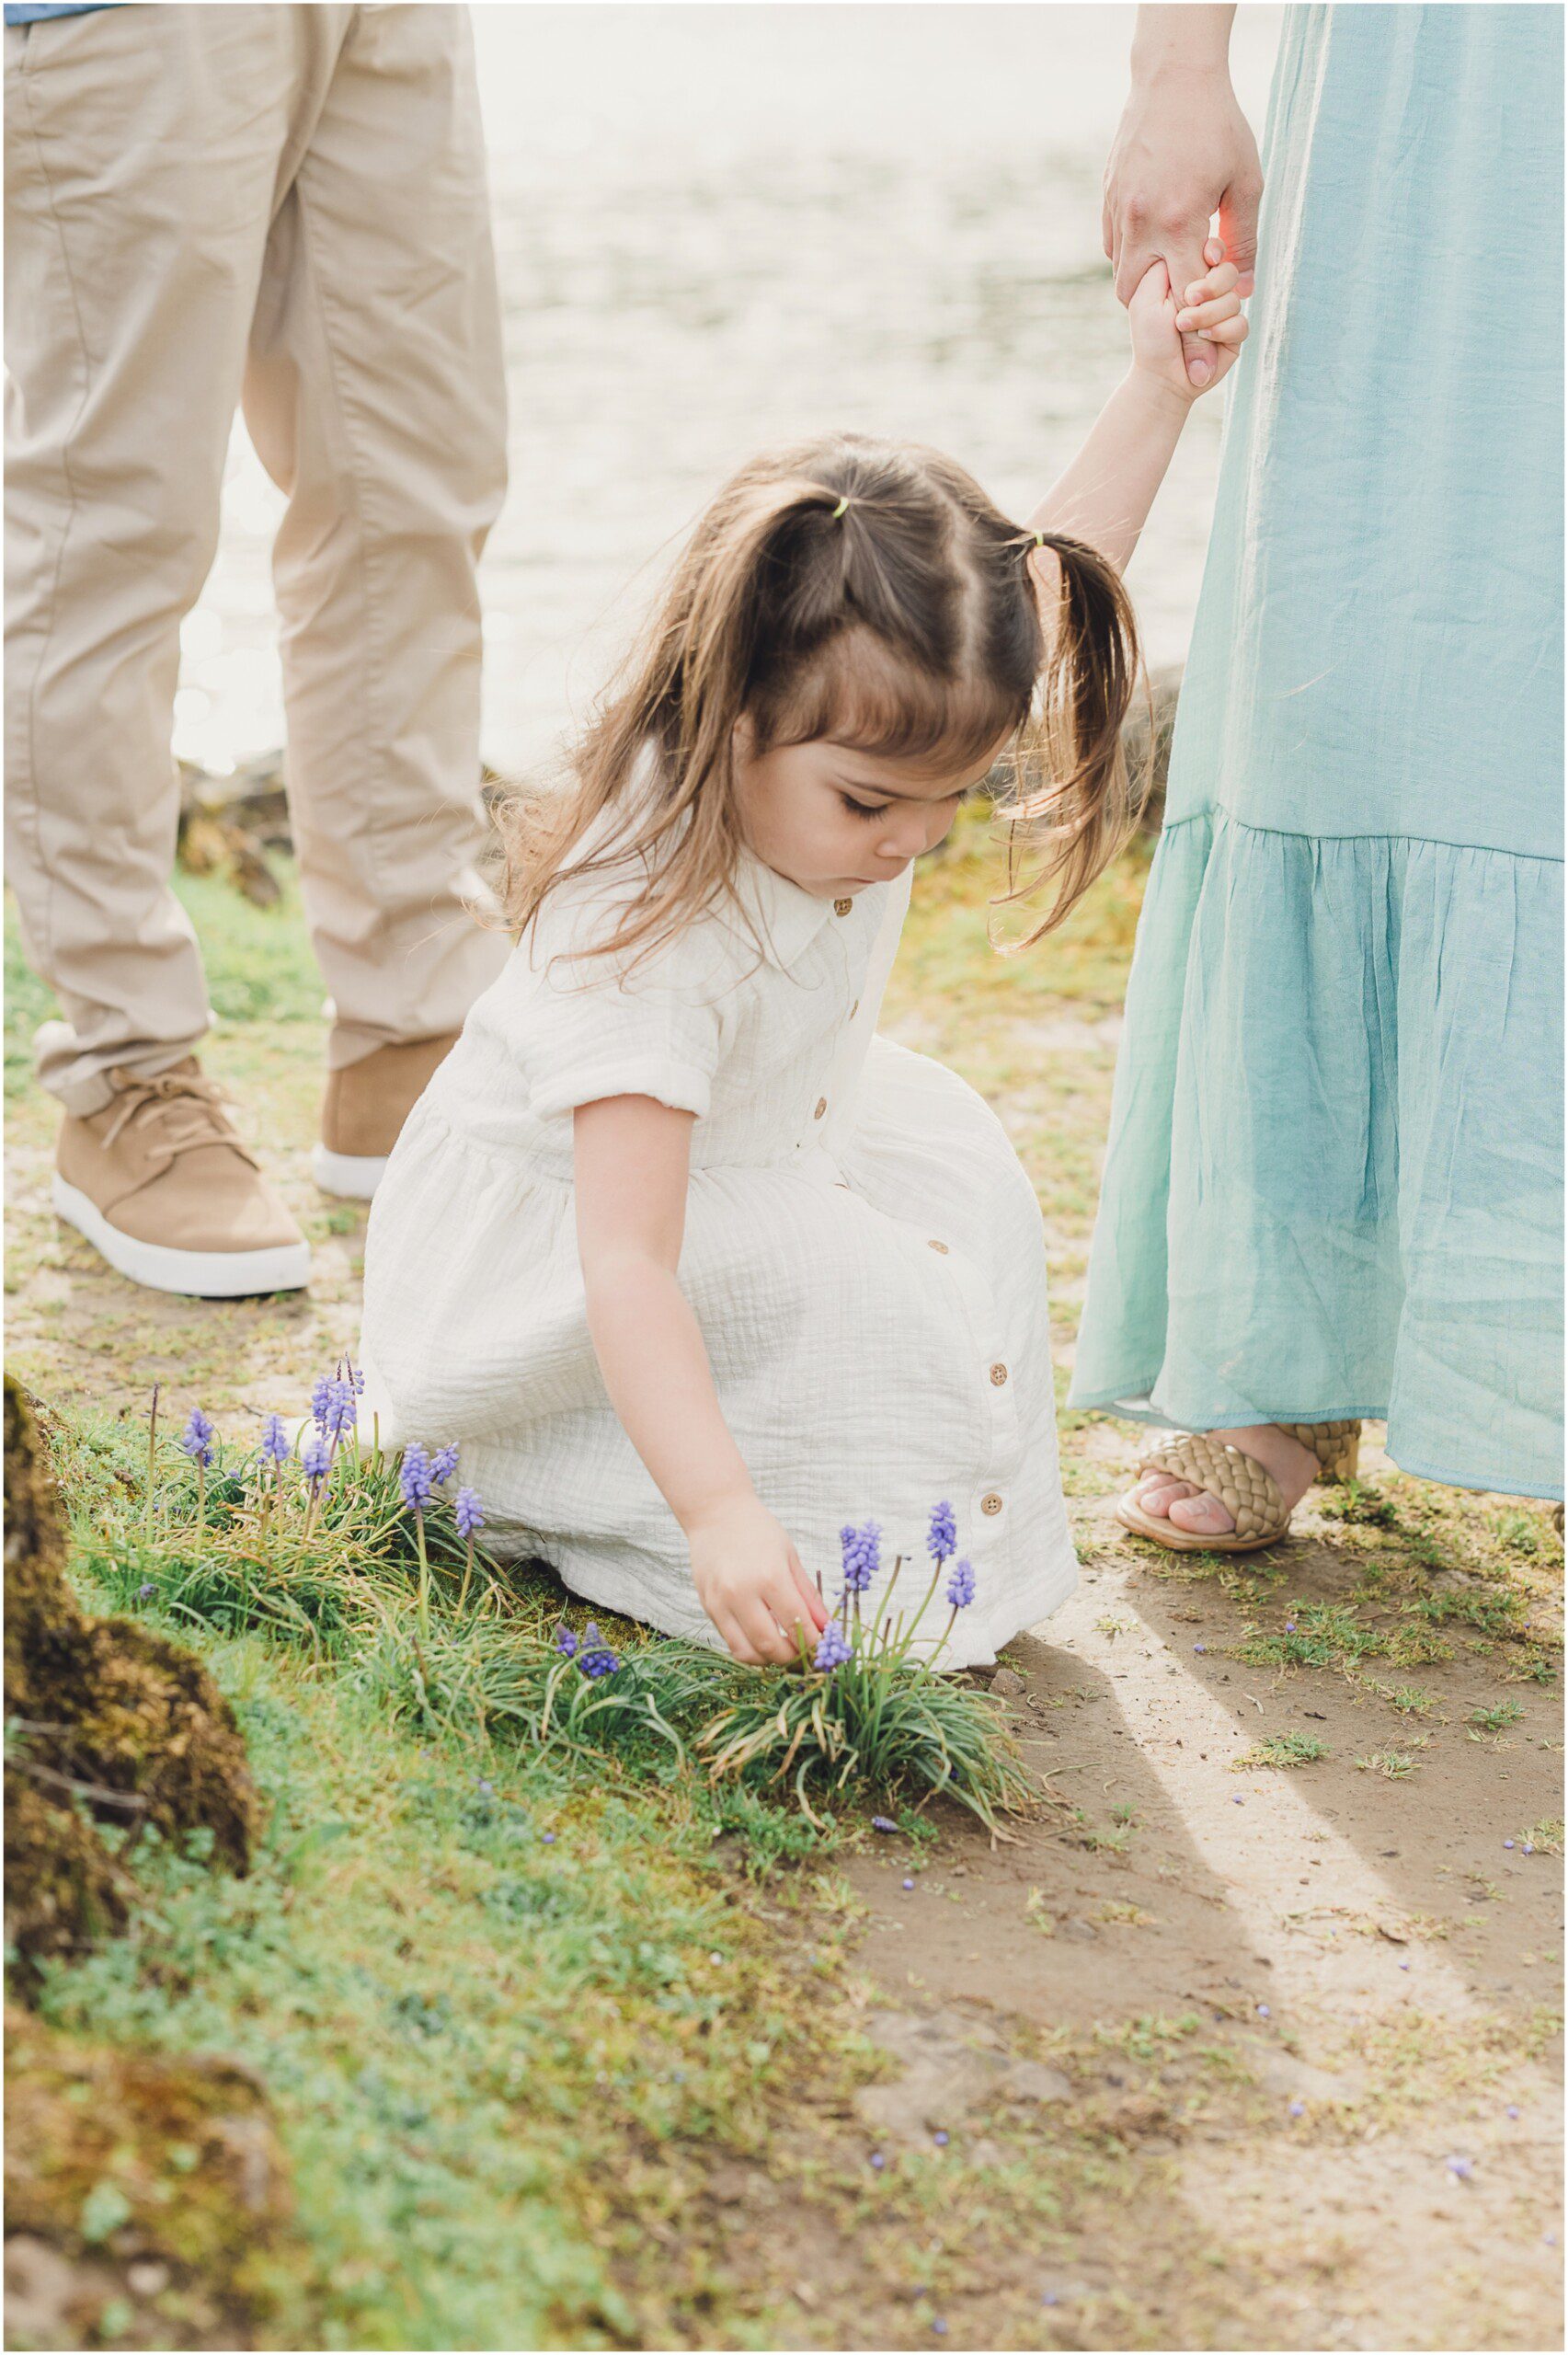 A young girl picks a flower on a path at Elk Rock Island in Lake Oswego during their Family Photo session